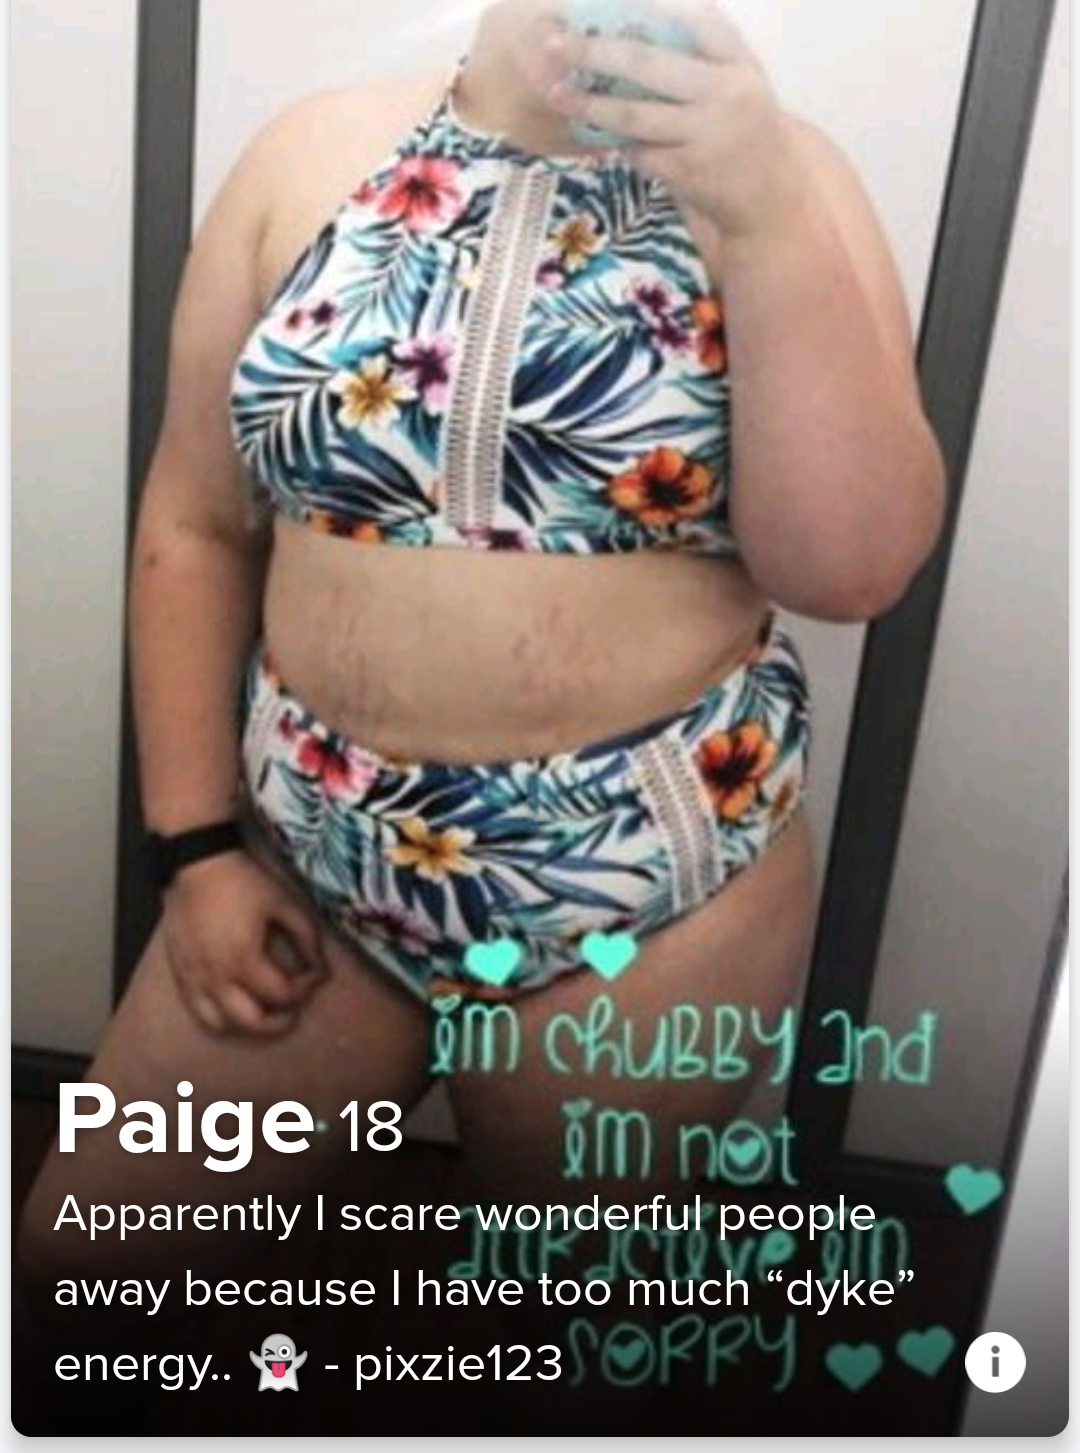 tinder - orange - M Chubby and Paige 18 im not Apparently I scare wonderful people away because I have too much "dyke energy. pixzie123 Worry